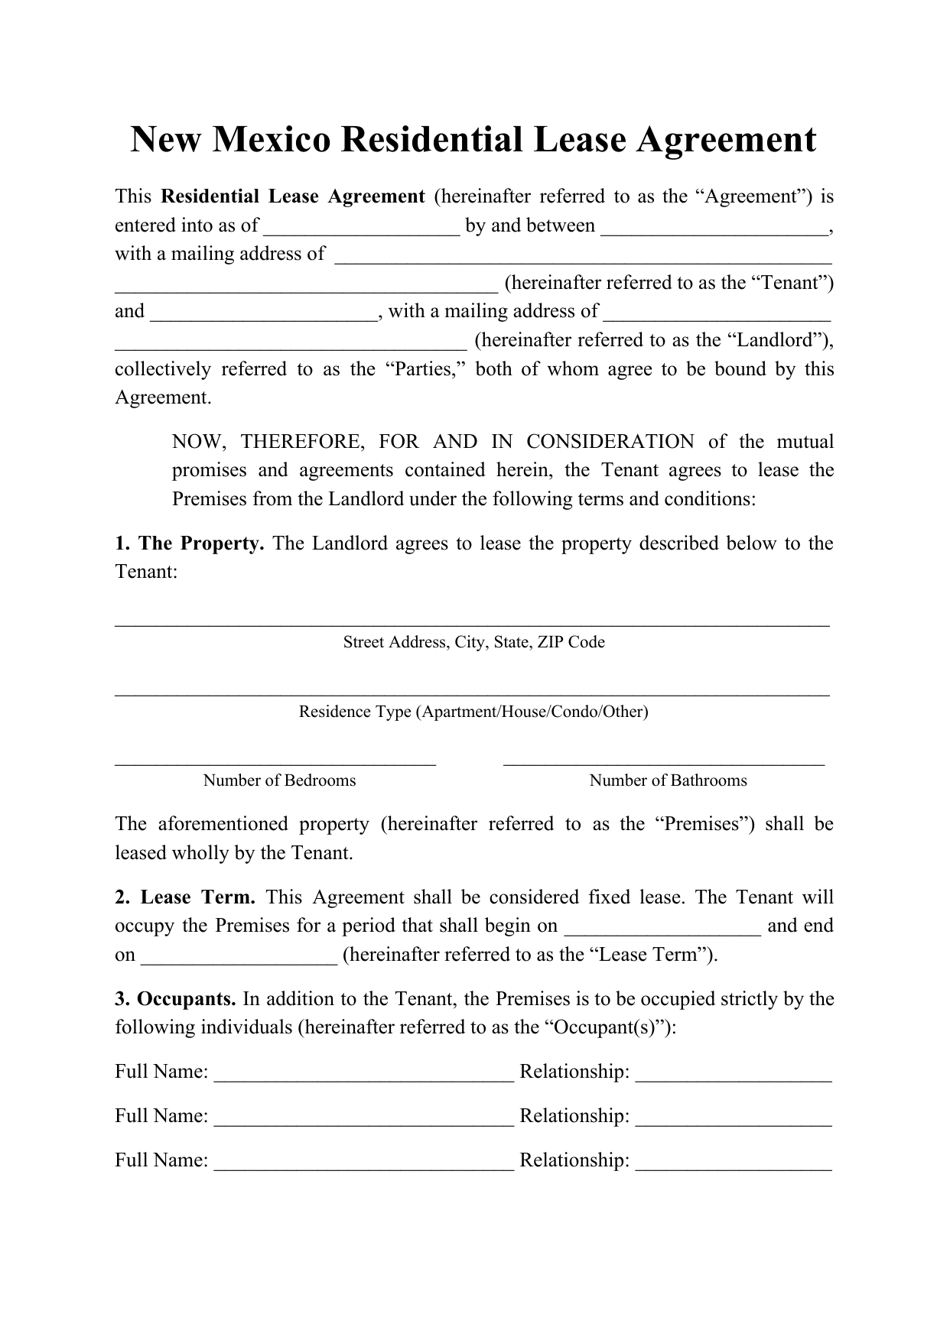 Residential Lease Agreement Template - New Mexico, Page 1